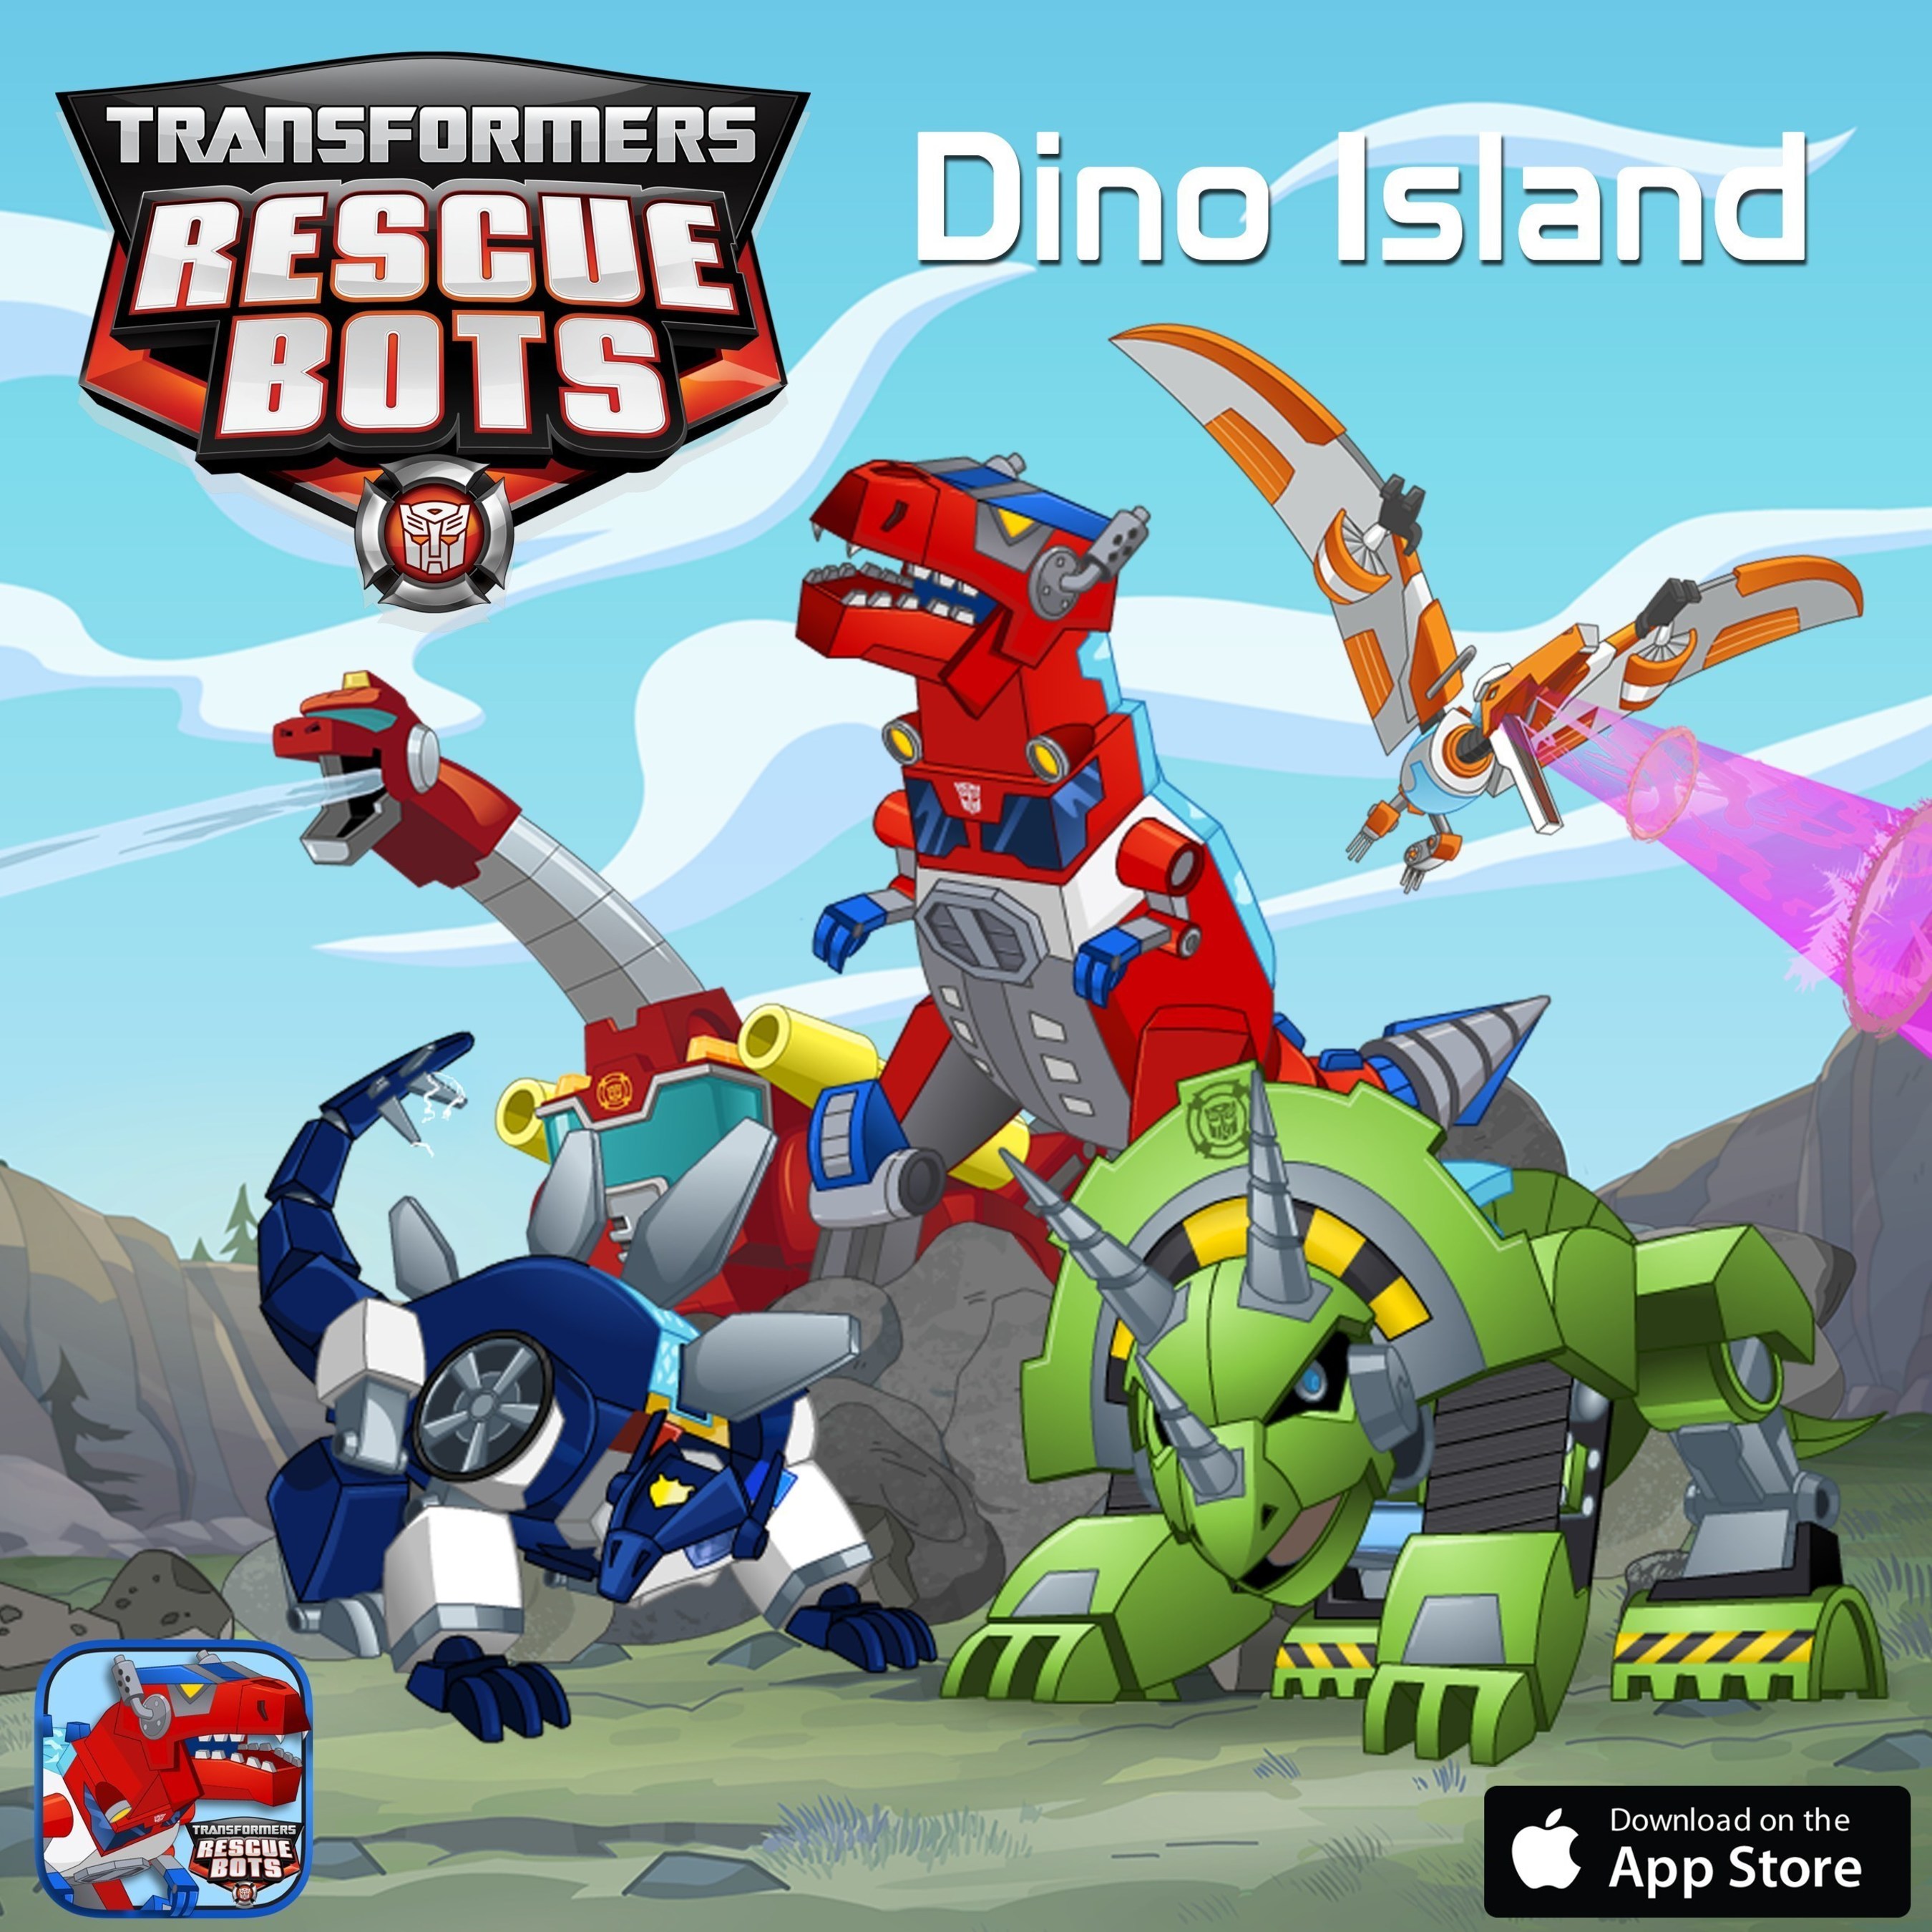 transformers and dinosaurs